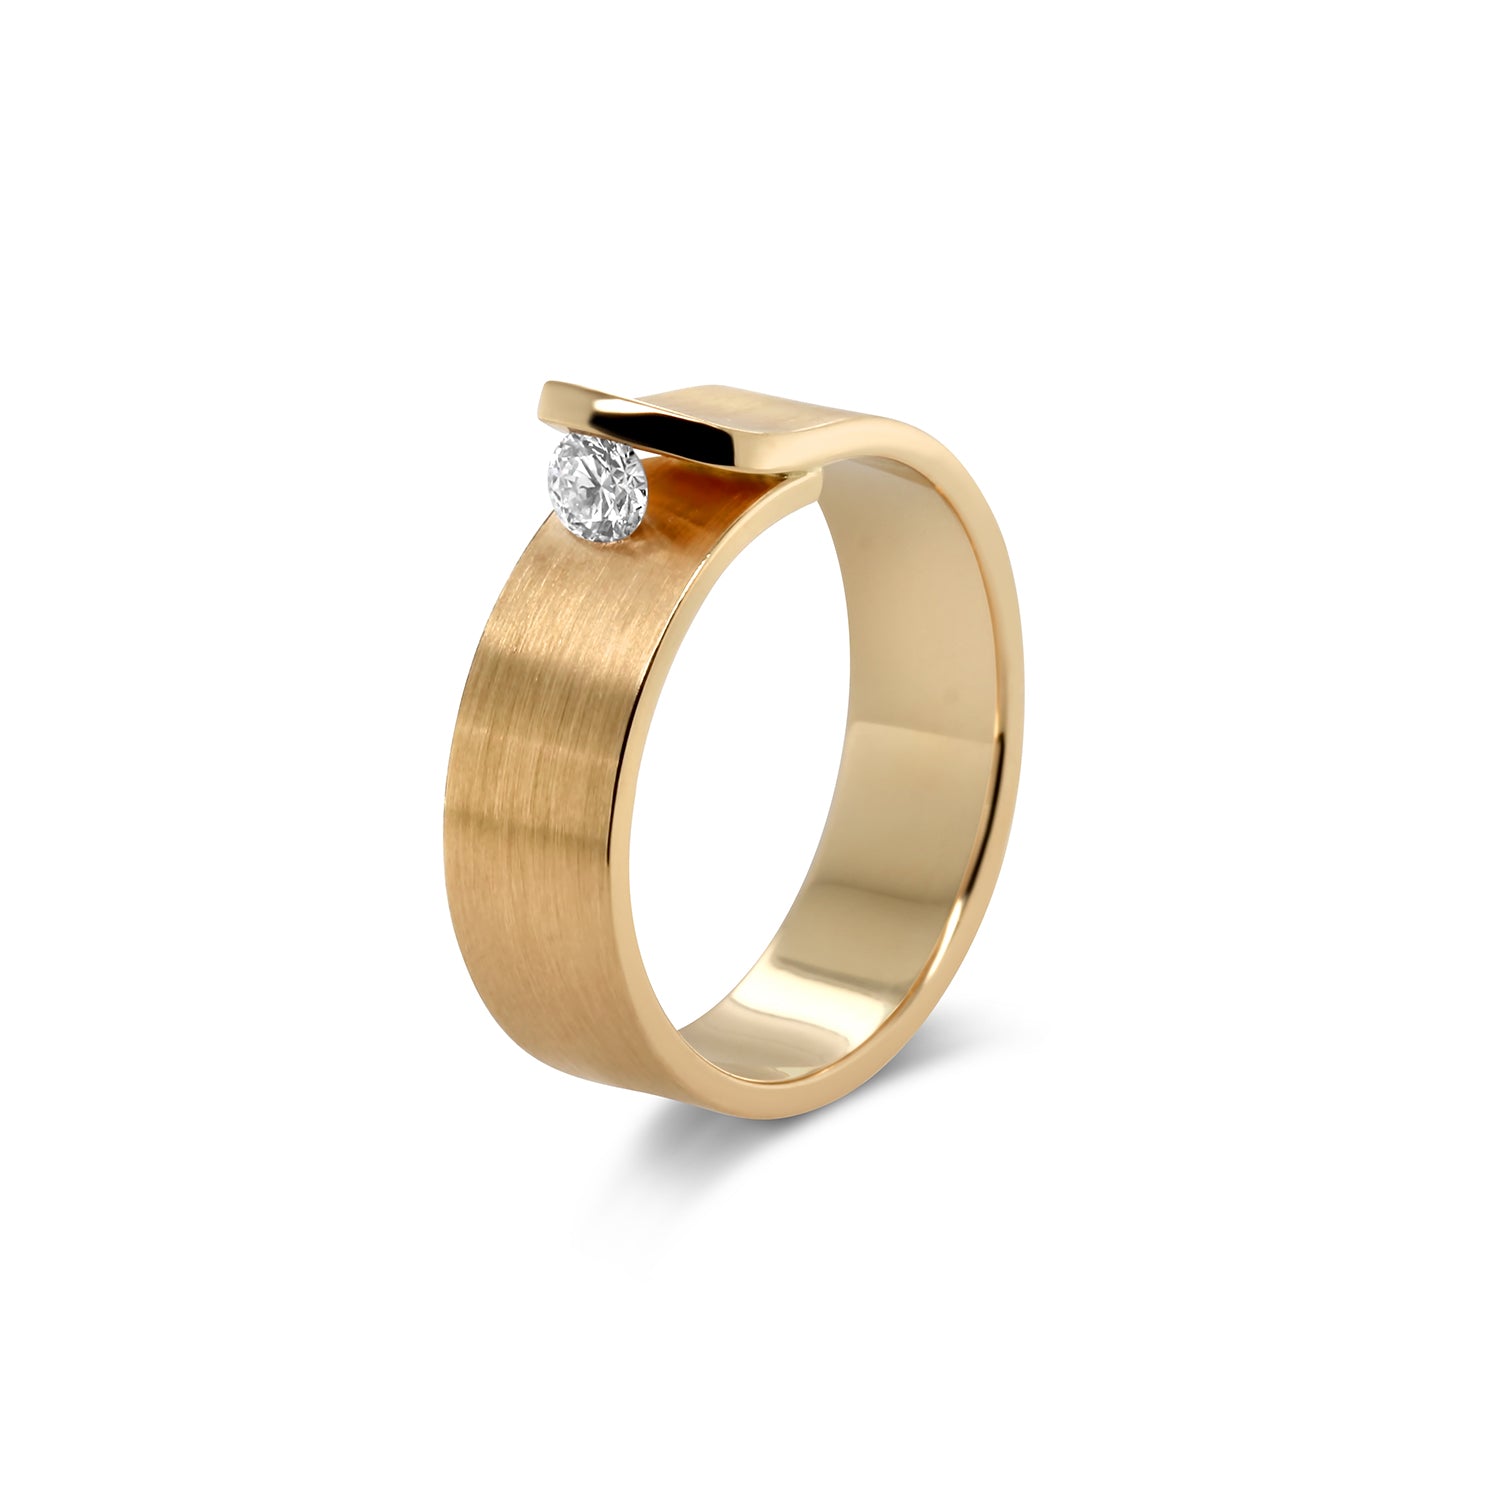 CaratLane: A Tanishq Partnership - Dazzling solitaire rings that are sure  to make her blush! Explore Solitaire Rings Under Rs. 40,000:  https://goo.gl/6X8xFH | Facebook